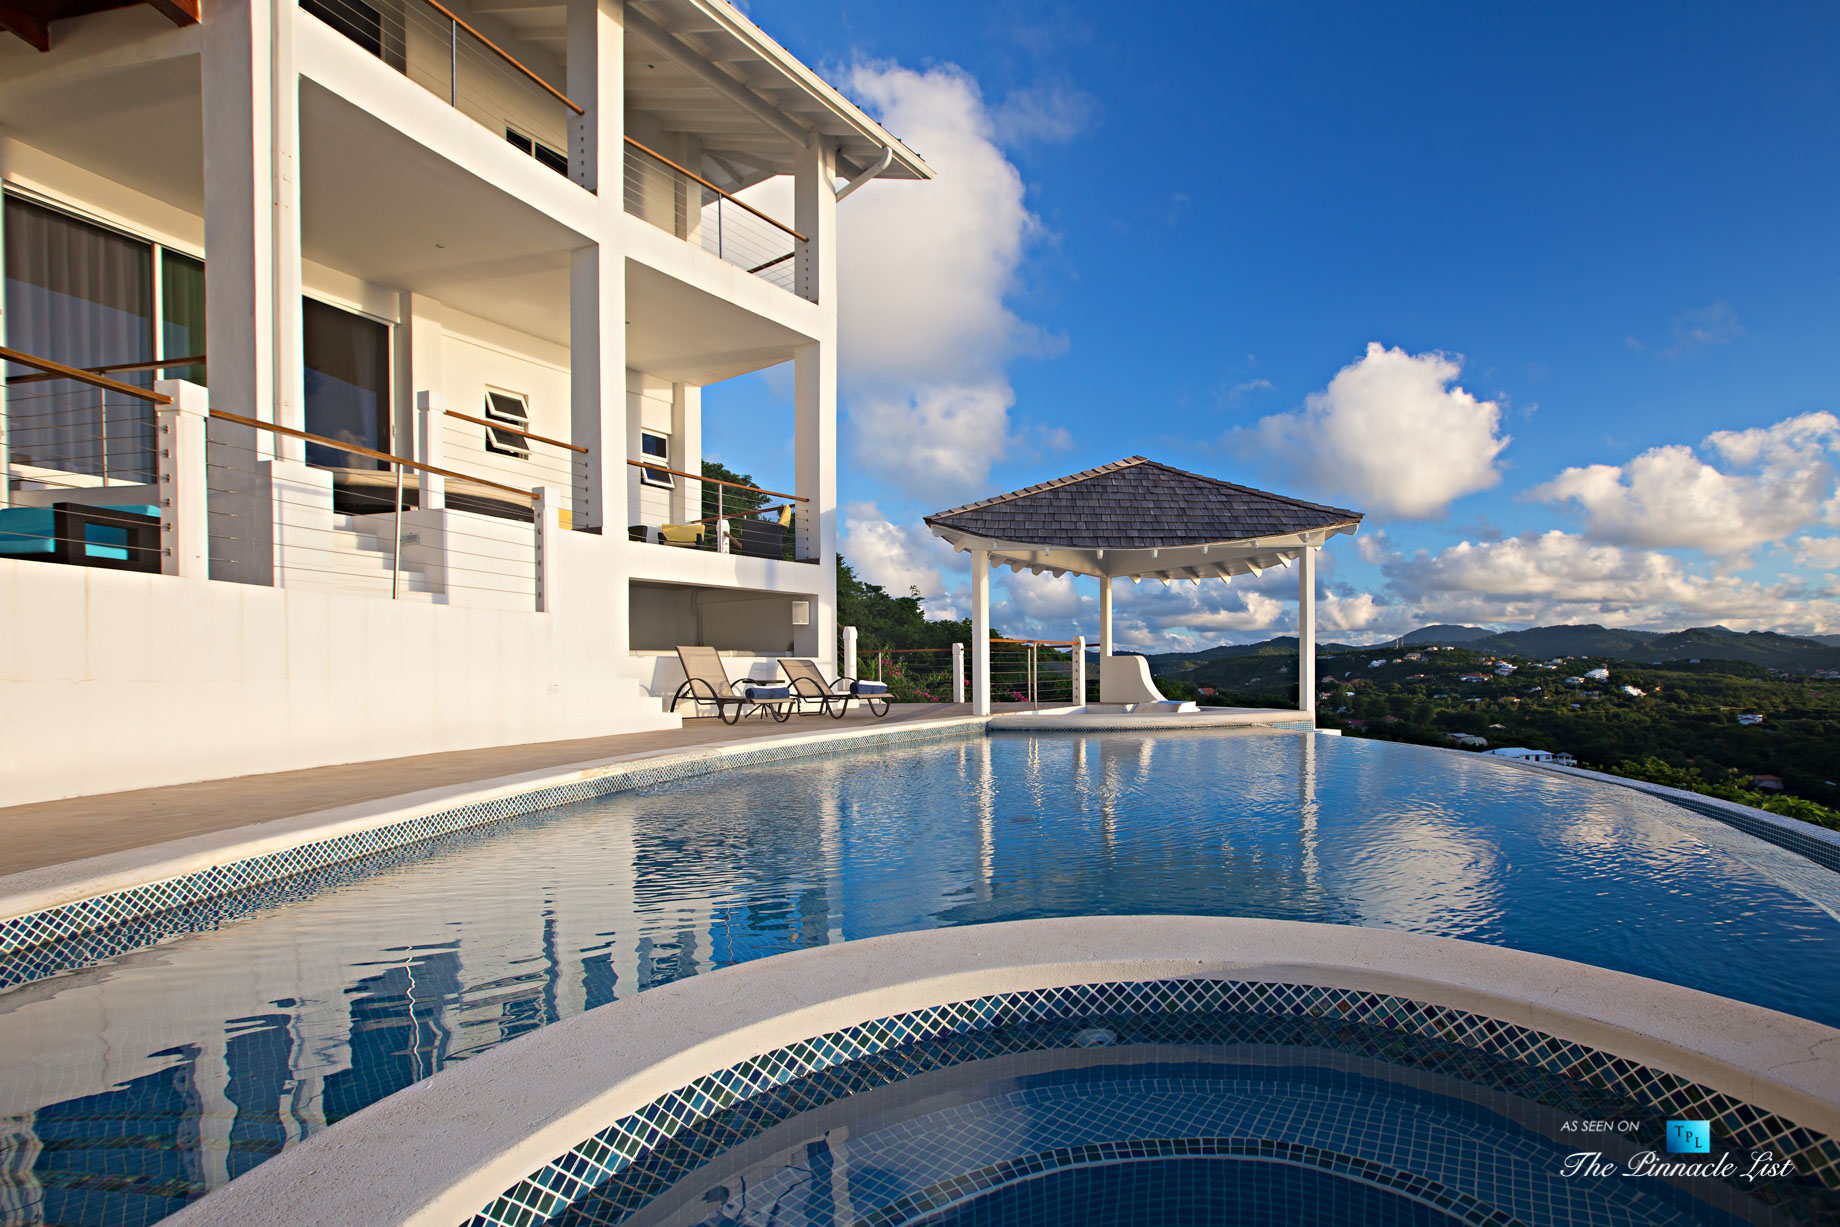 Akasha Luxury Caribbean Villa – Cap Estate, St. Lucia – Infinity Pool and Hot Tub View – Luxury Real Estate – Premier Oceanview Home